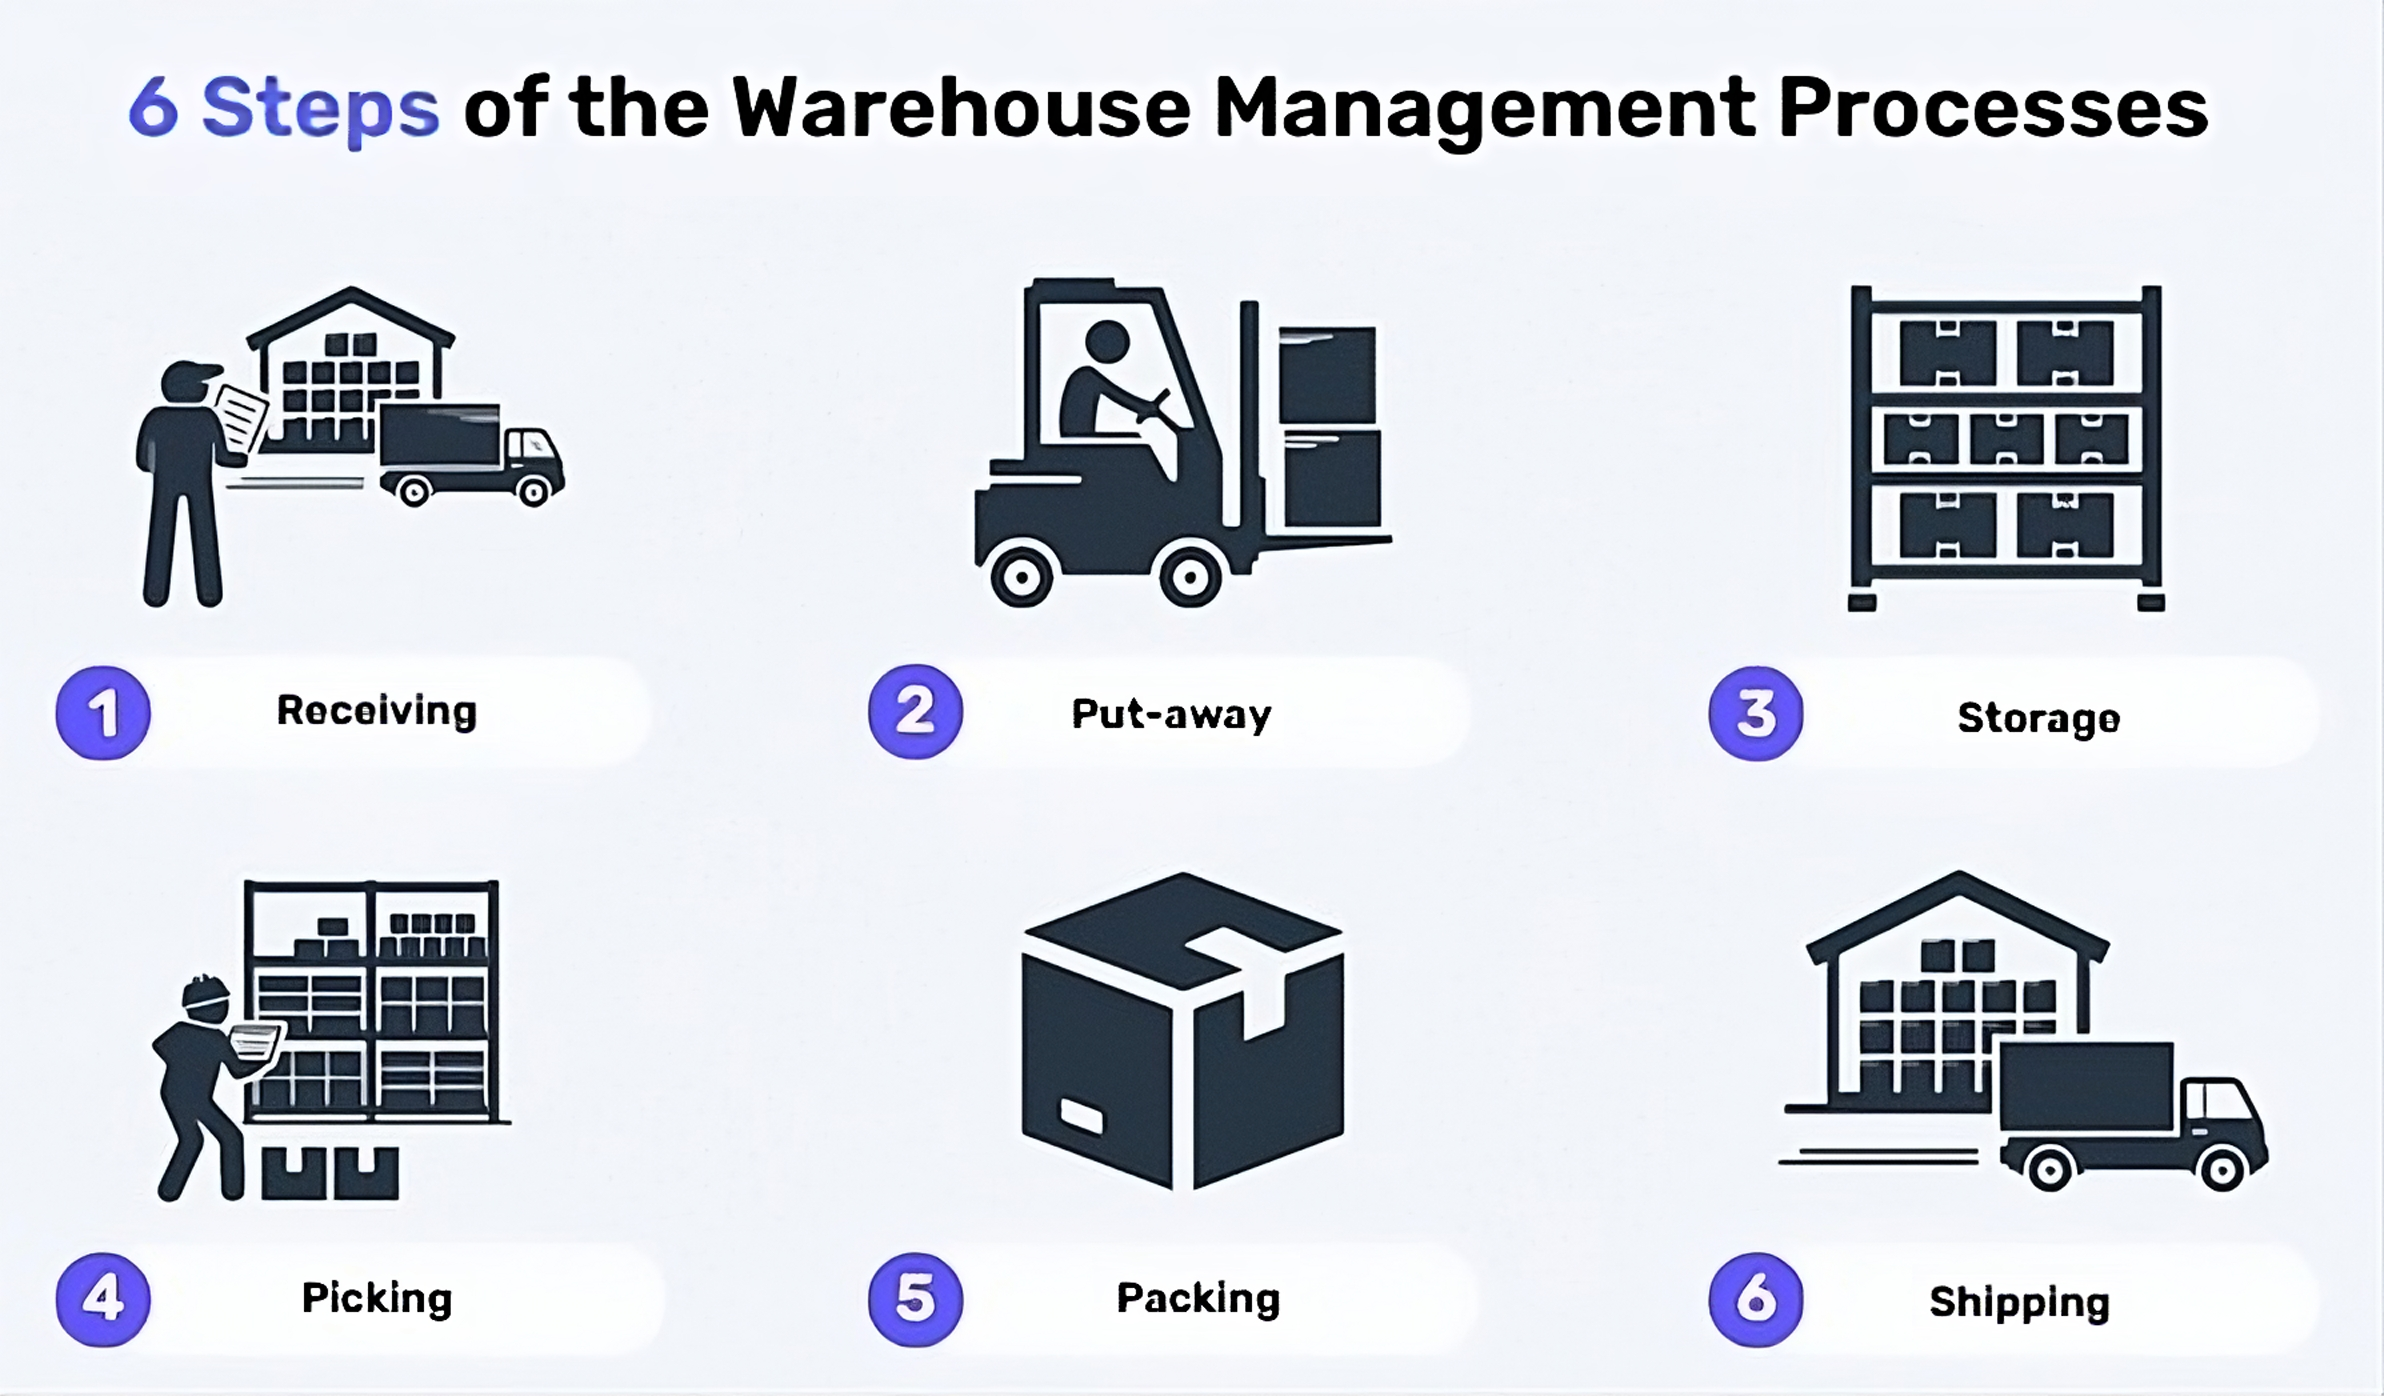 Wearhouse management systems